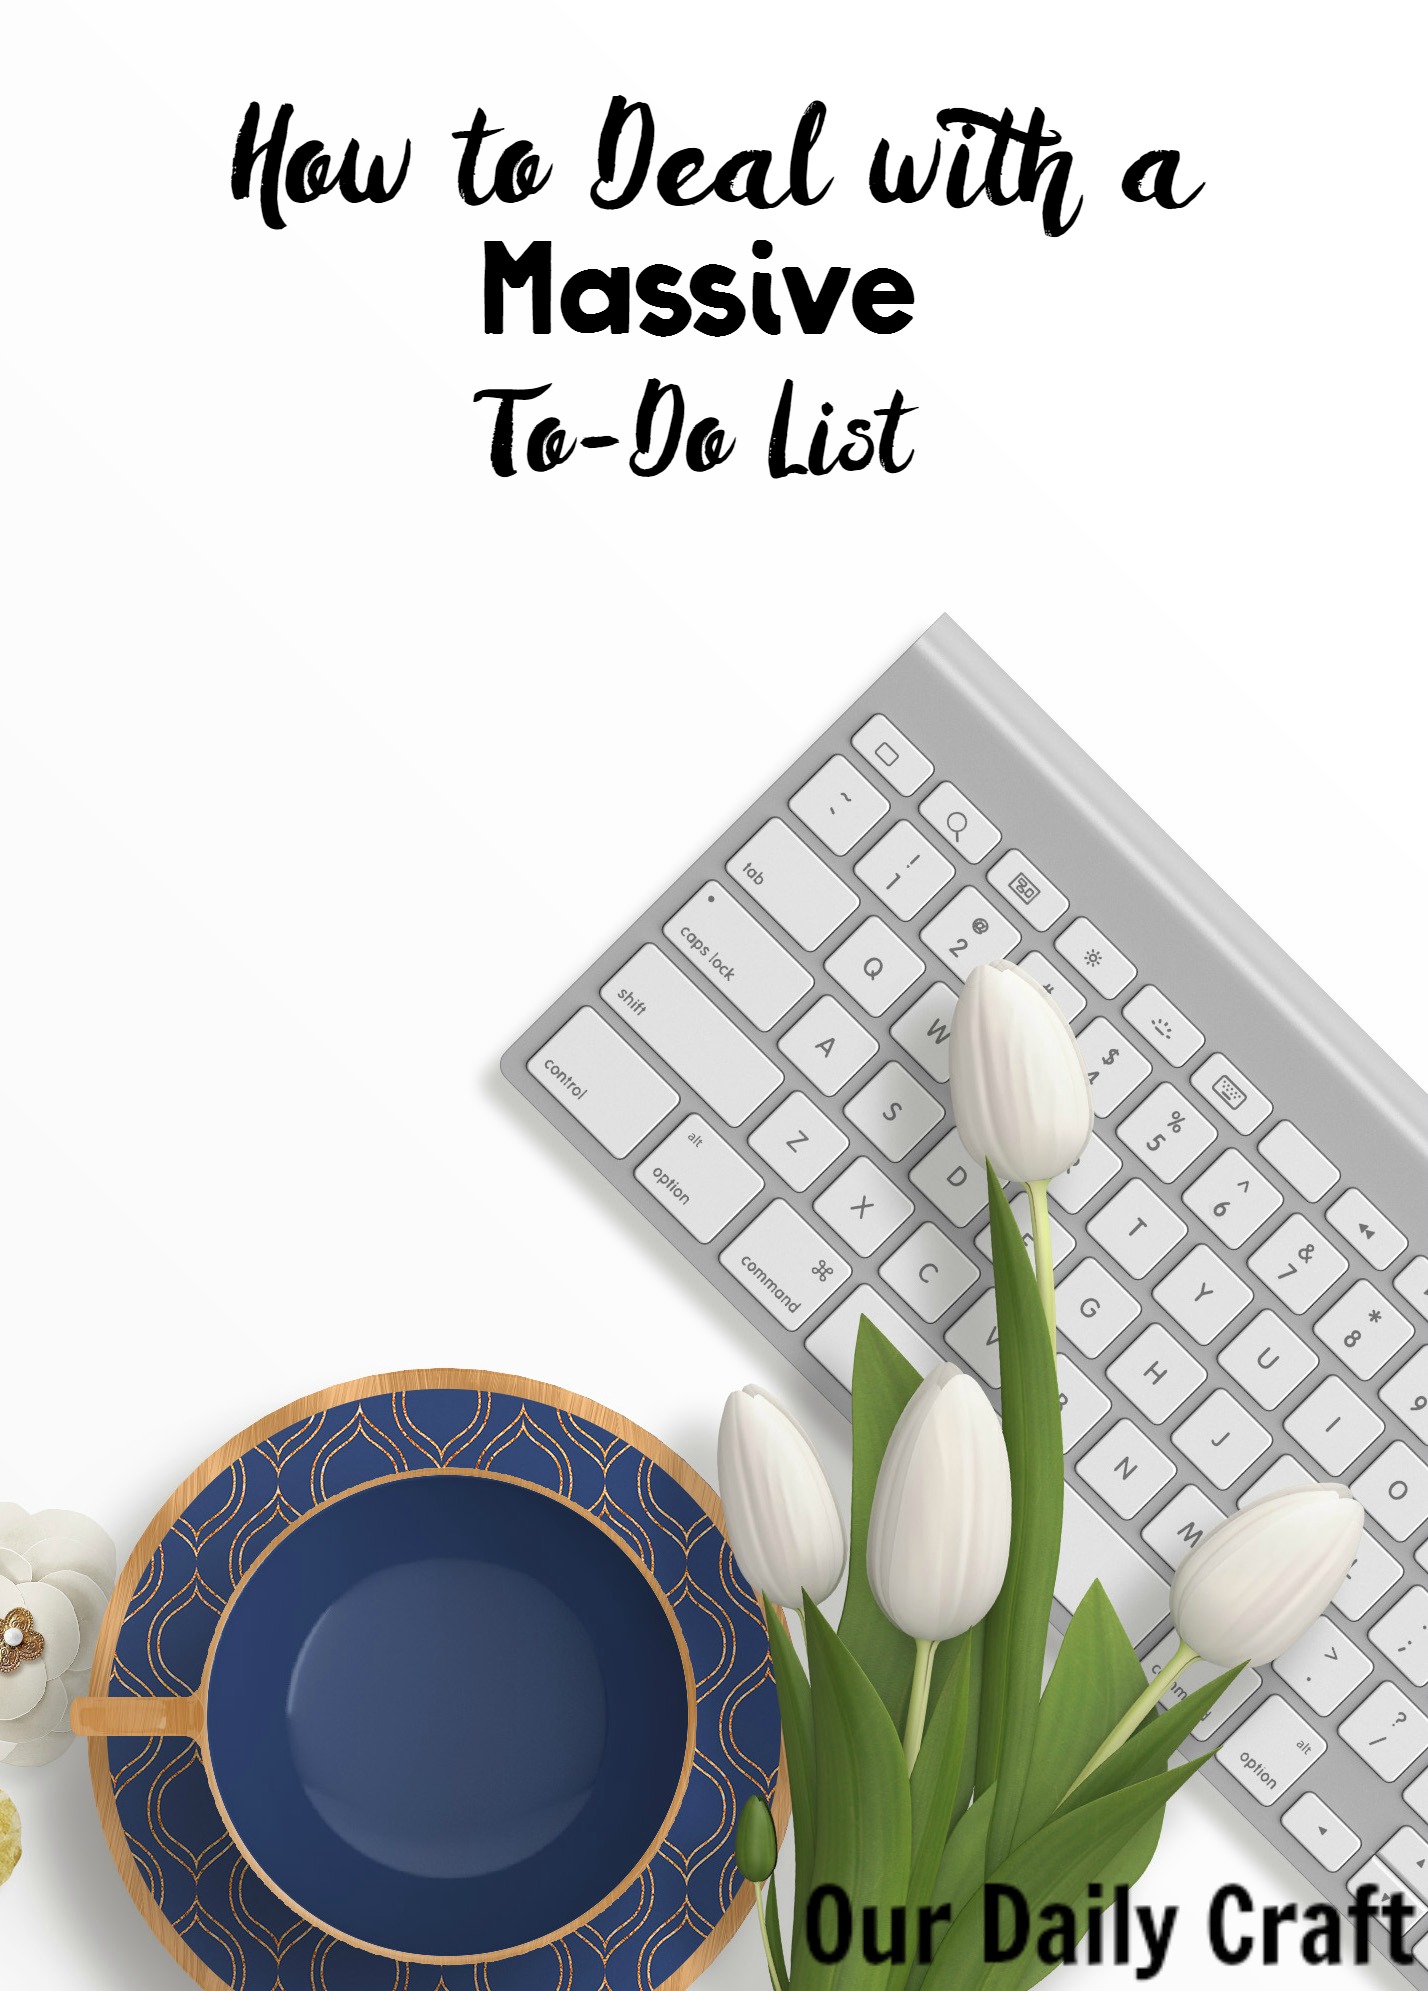 How to Deal with a Massive To-Do List